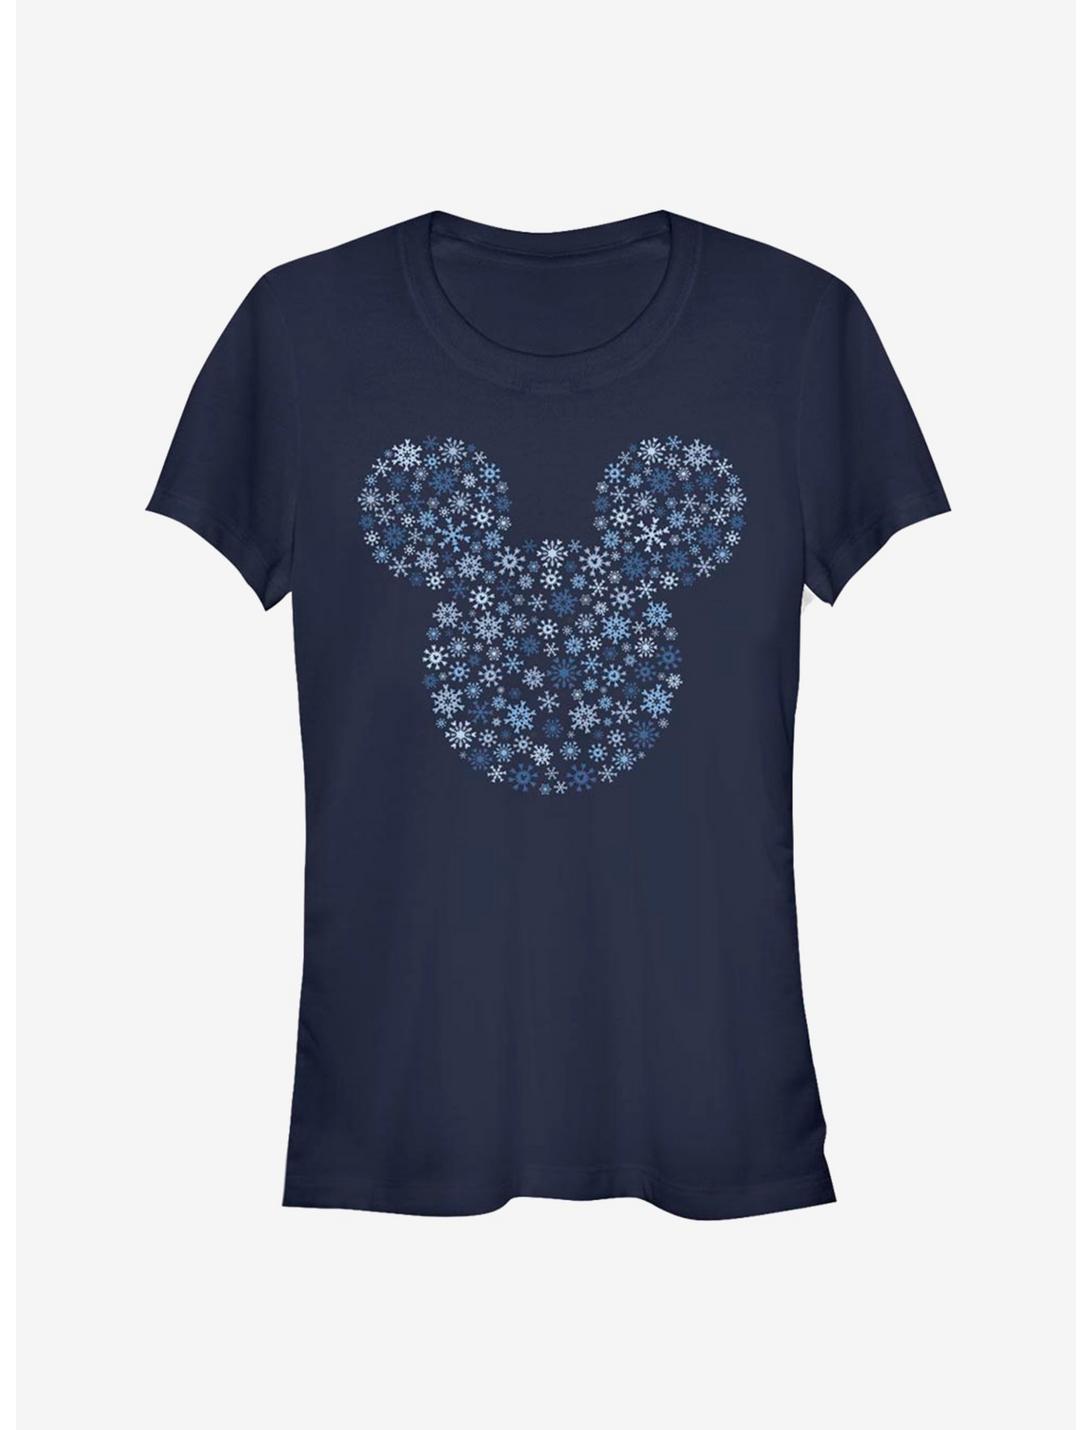 Disney Mickey Mouse Holiday Head Snowflake Outline Classic Girls T-Shirt, NAVY, hi-res